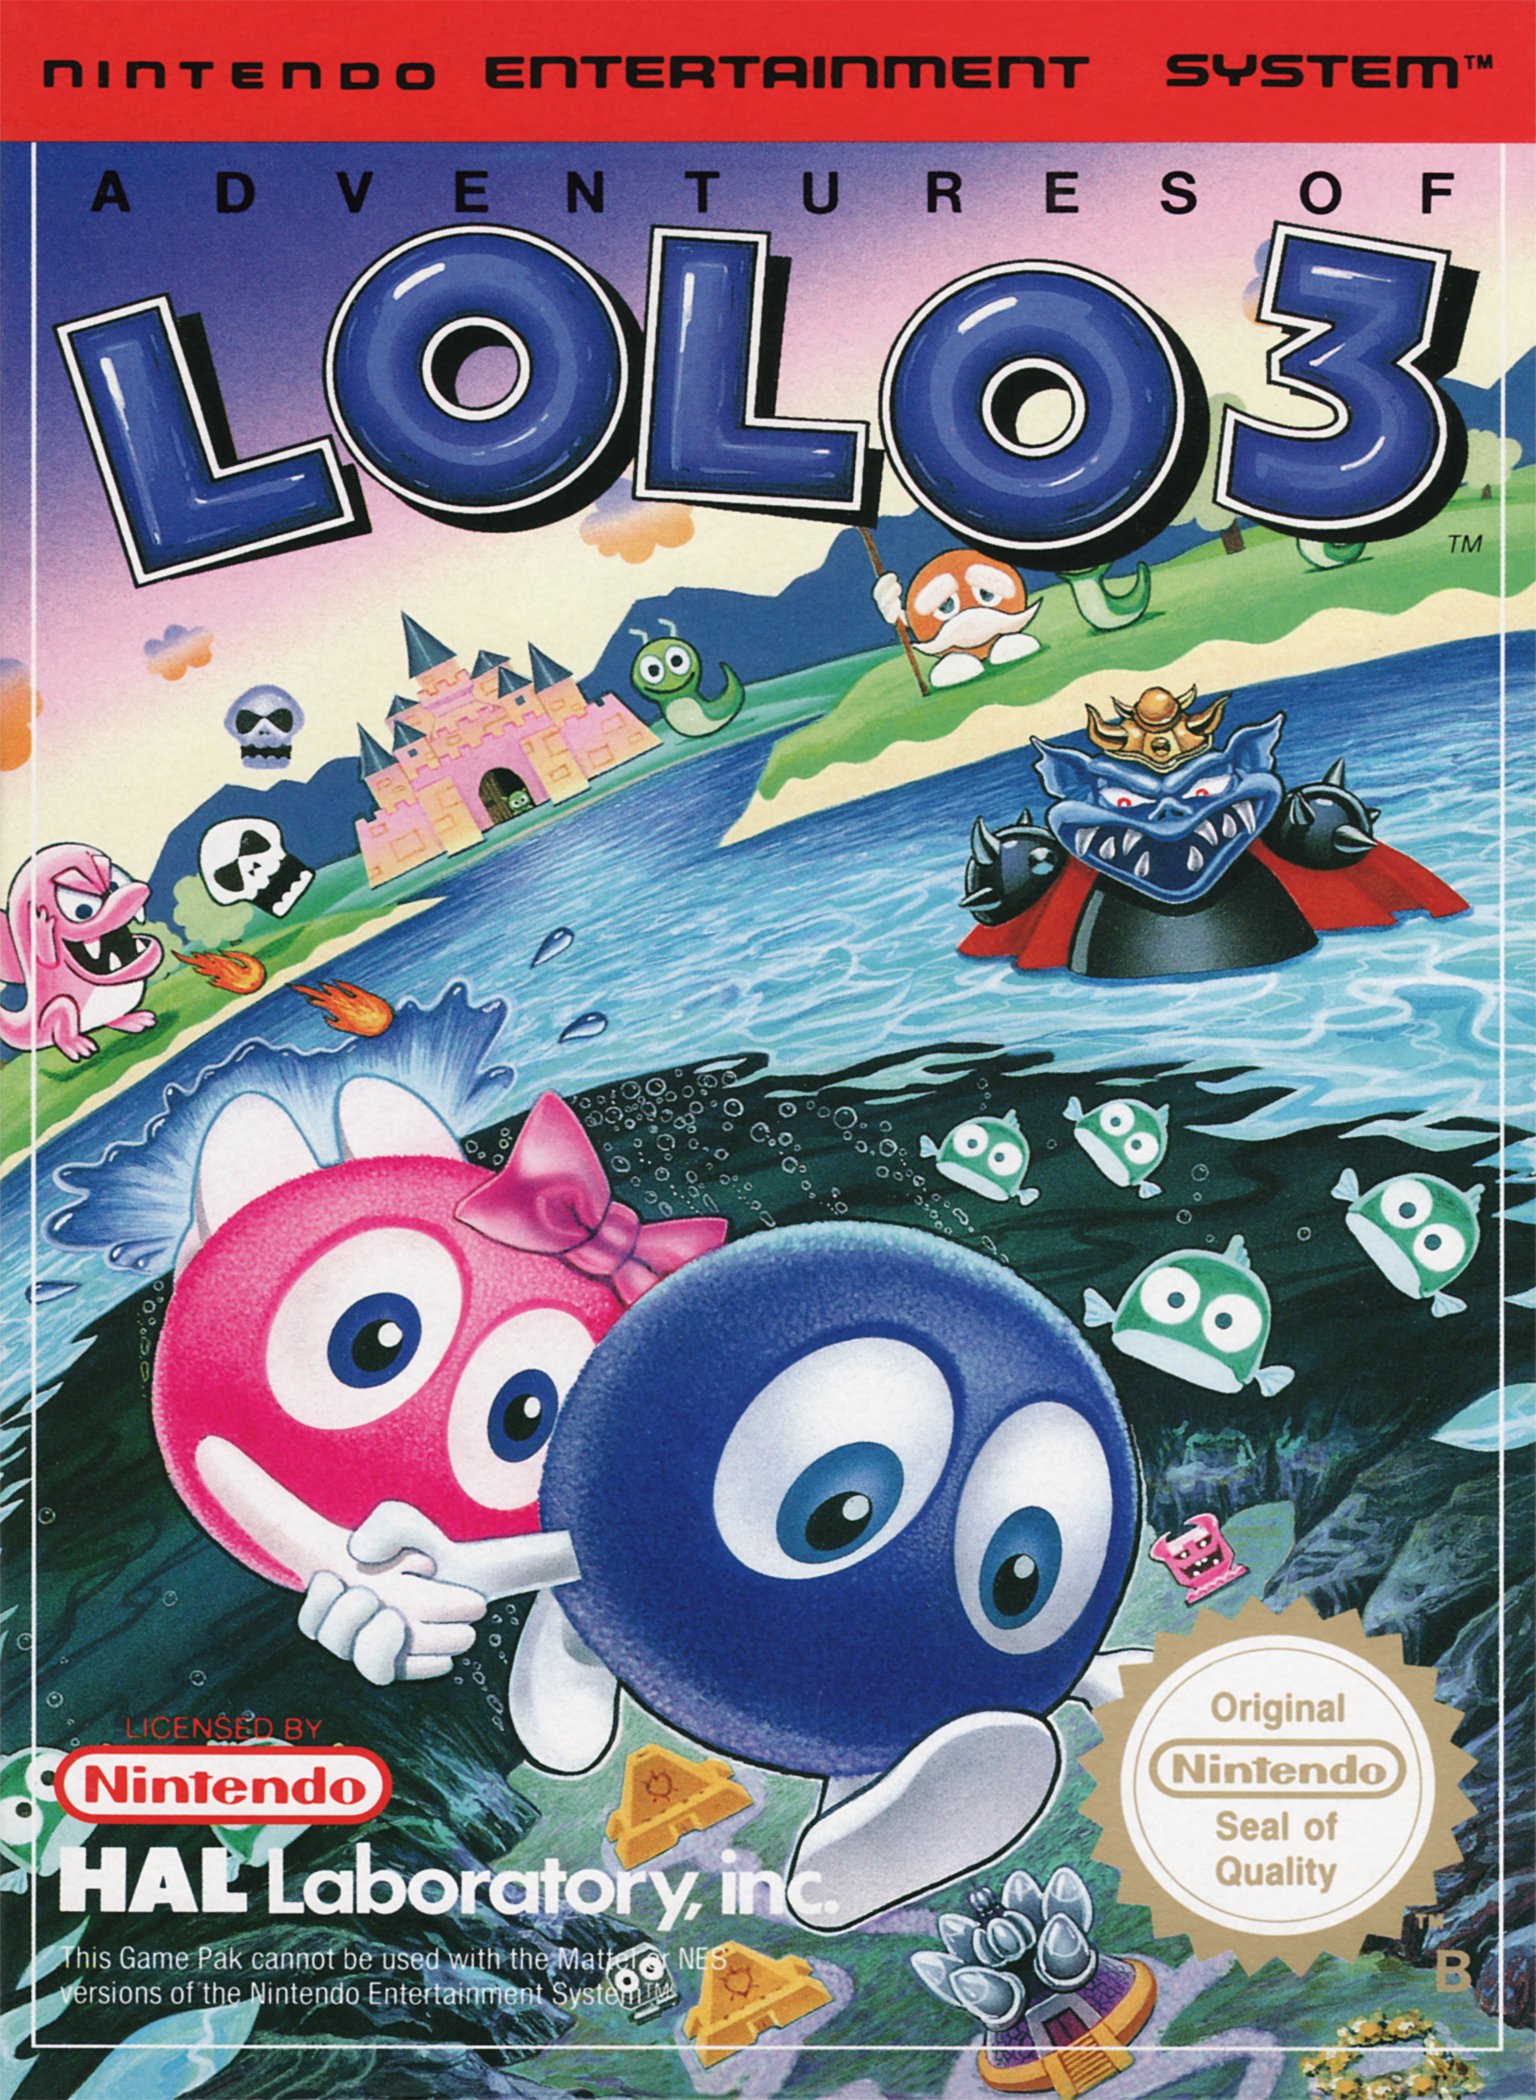 Image of Adventures of Lolo 3